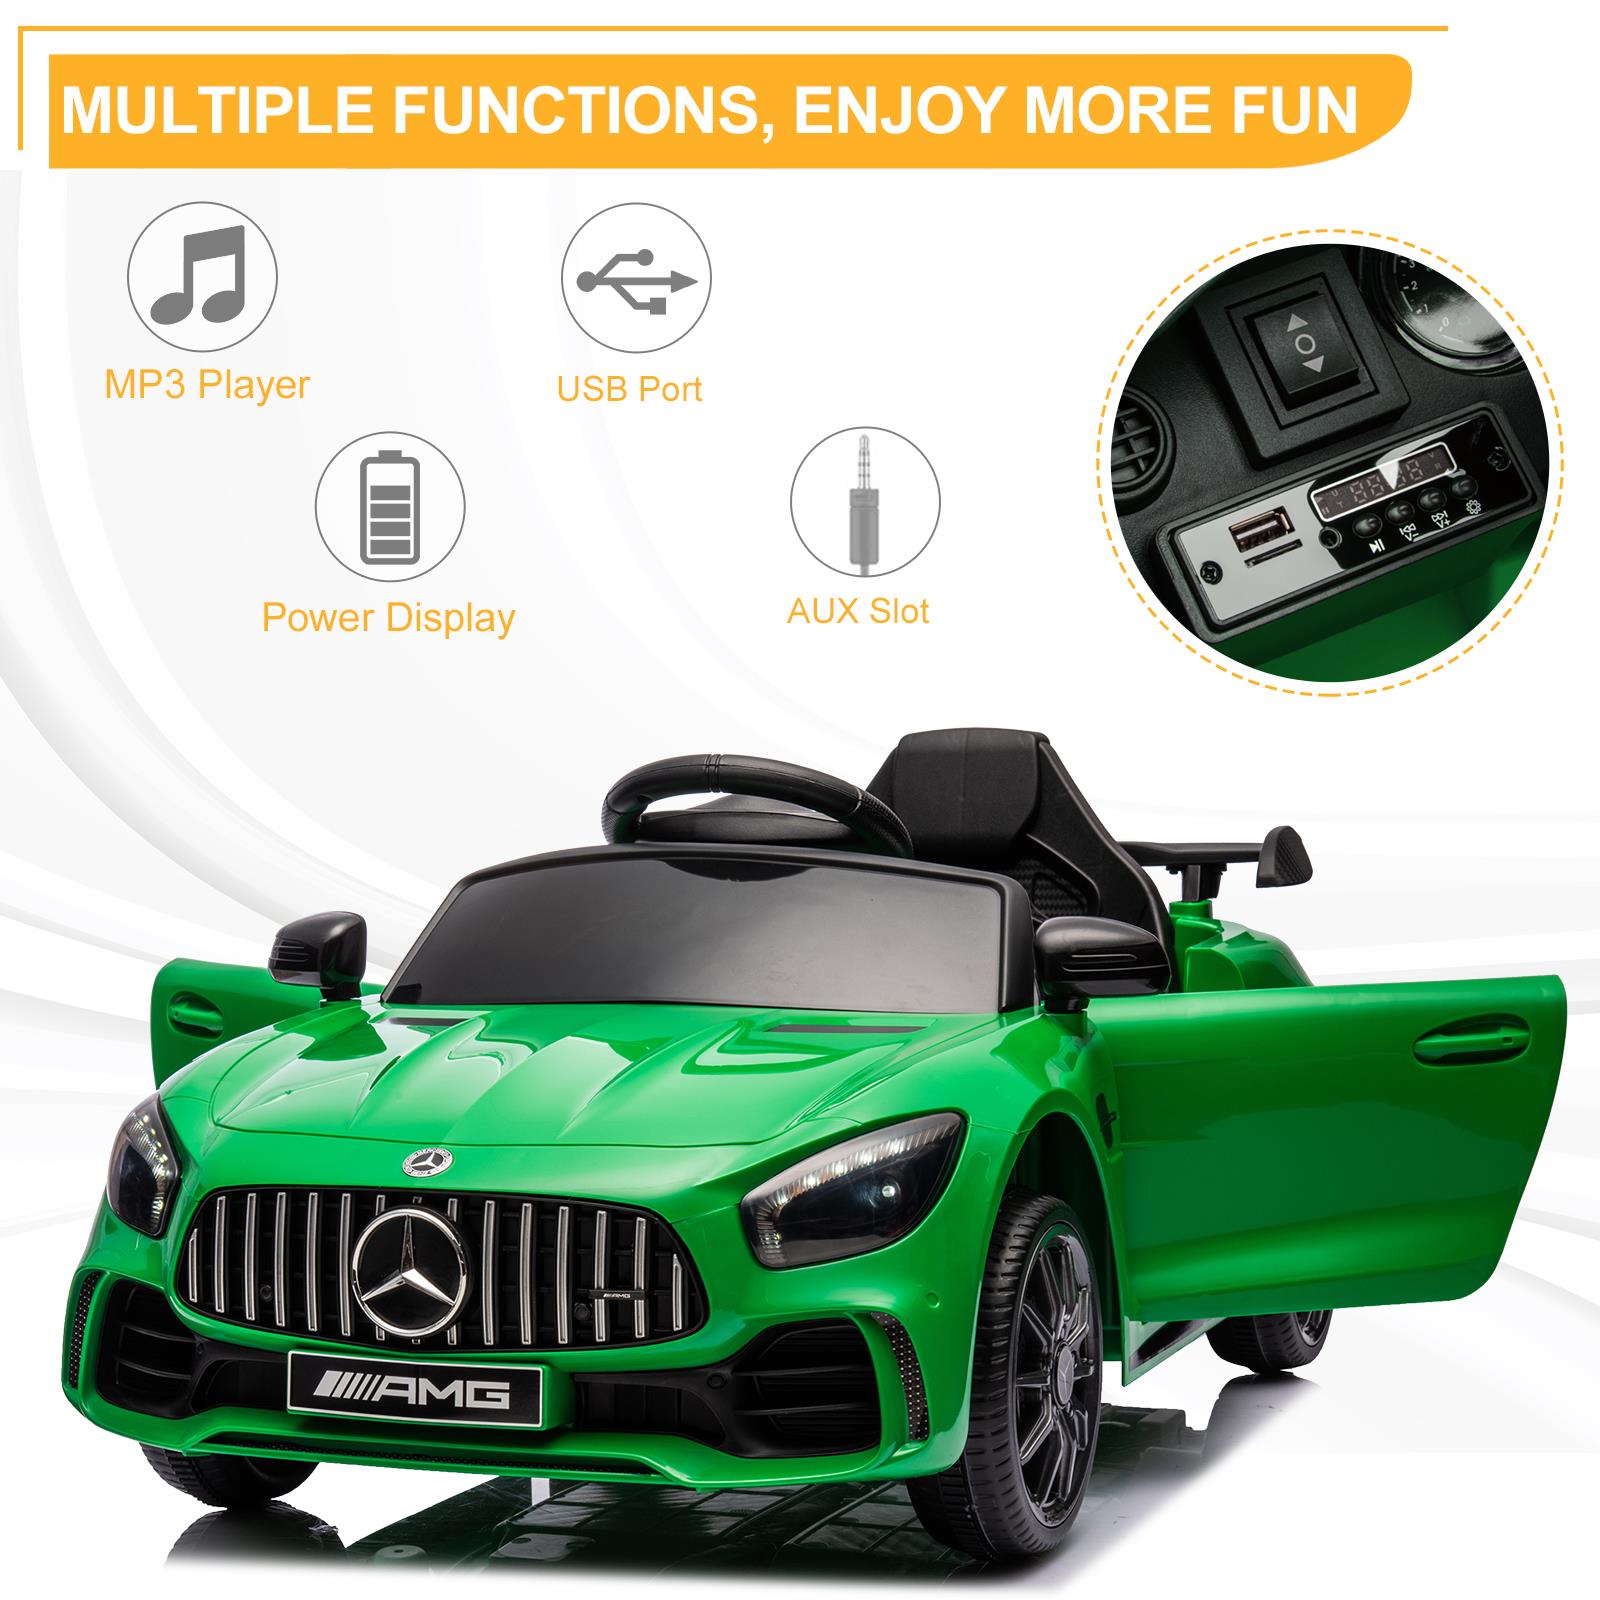 UBesGoo 12V Licensed Mercedes-Benz Electric Ride on Car Toy for Toddler Kid w/ Remote Control, LED Lights, Green - image 4 of 9